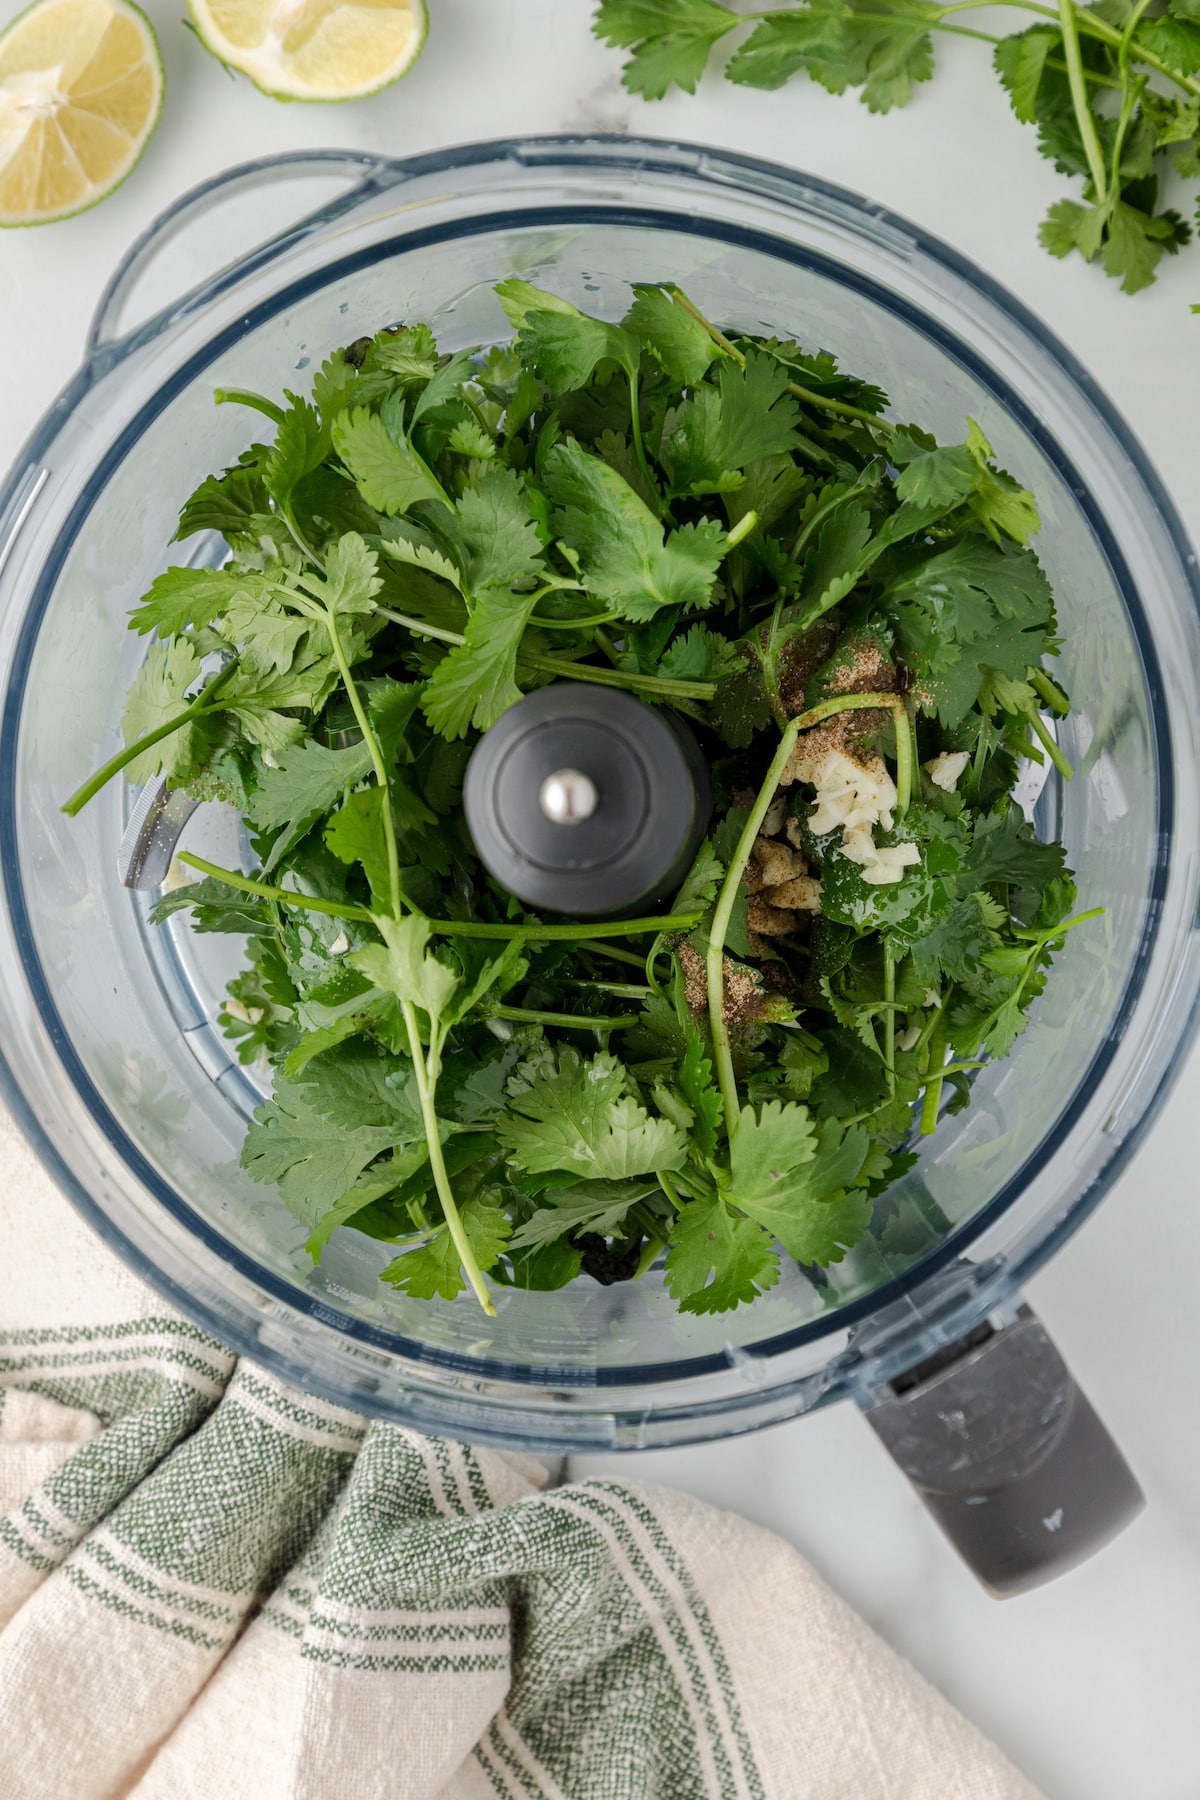 cilantro and other ingredients in a food processor